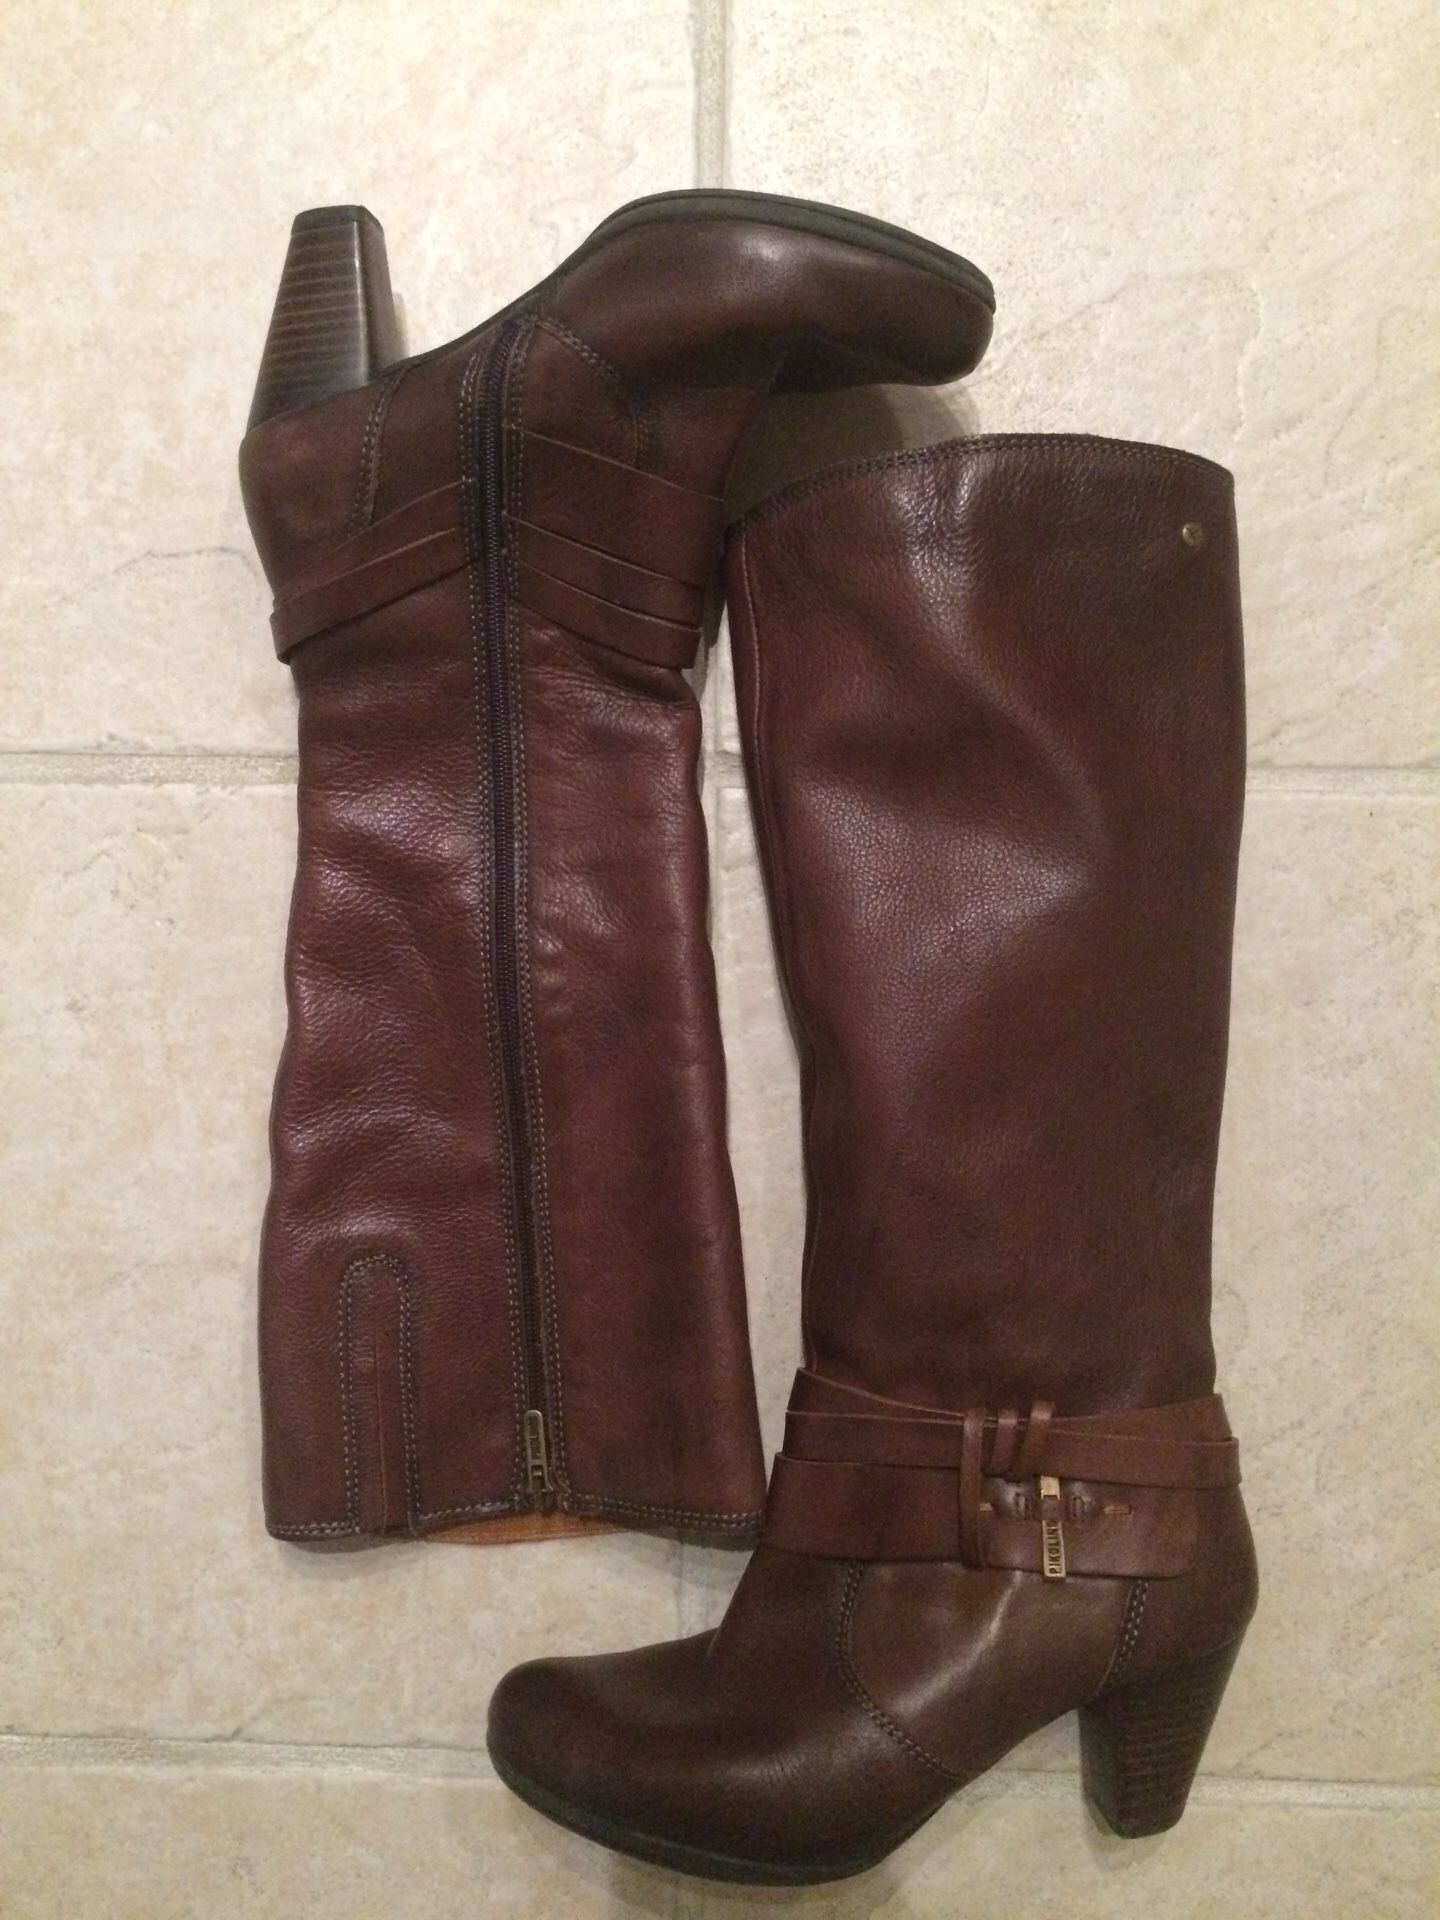 Pikolinos Size 6 brown leather women’s boots